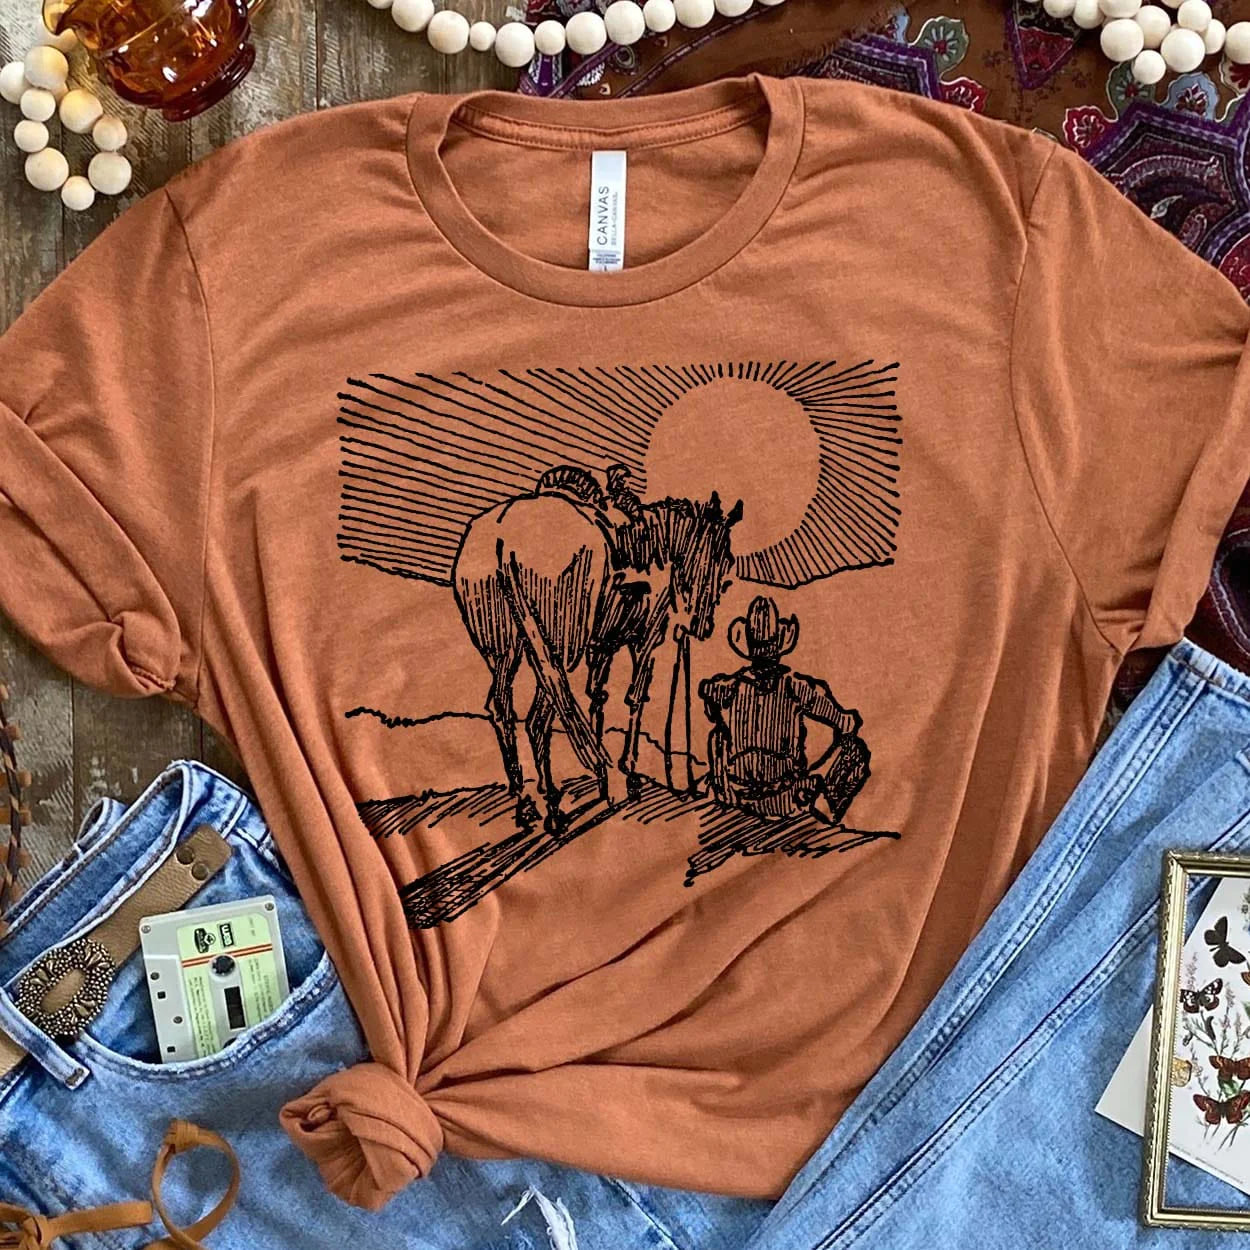 A light brown short sleeved shirt with a centered black and white graphic of a cowboy and a horse watching the sunset. Item is pictured on a brown background.